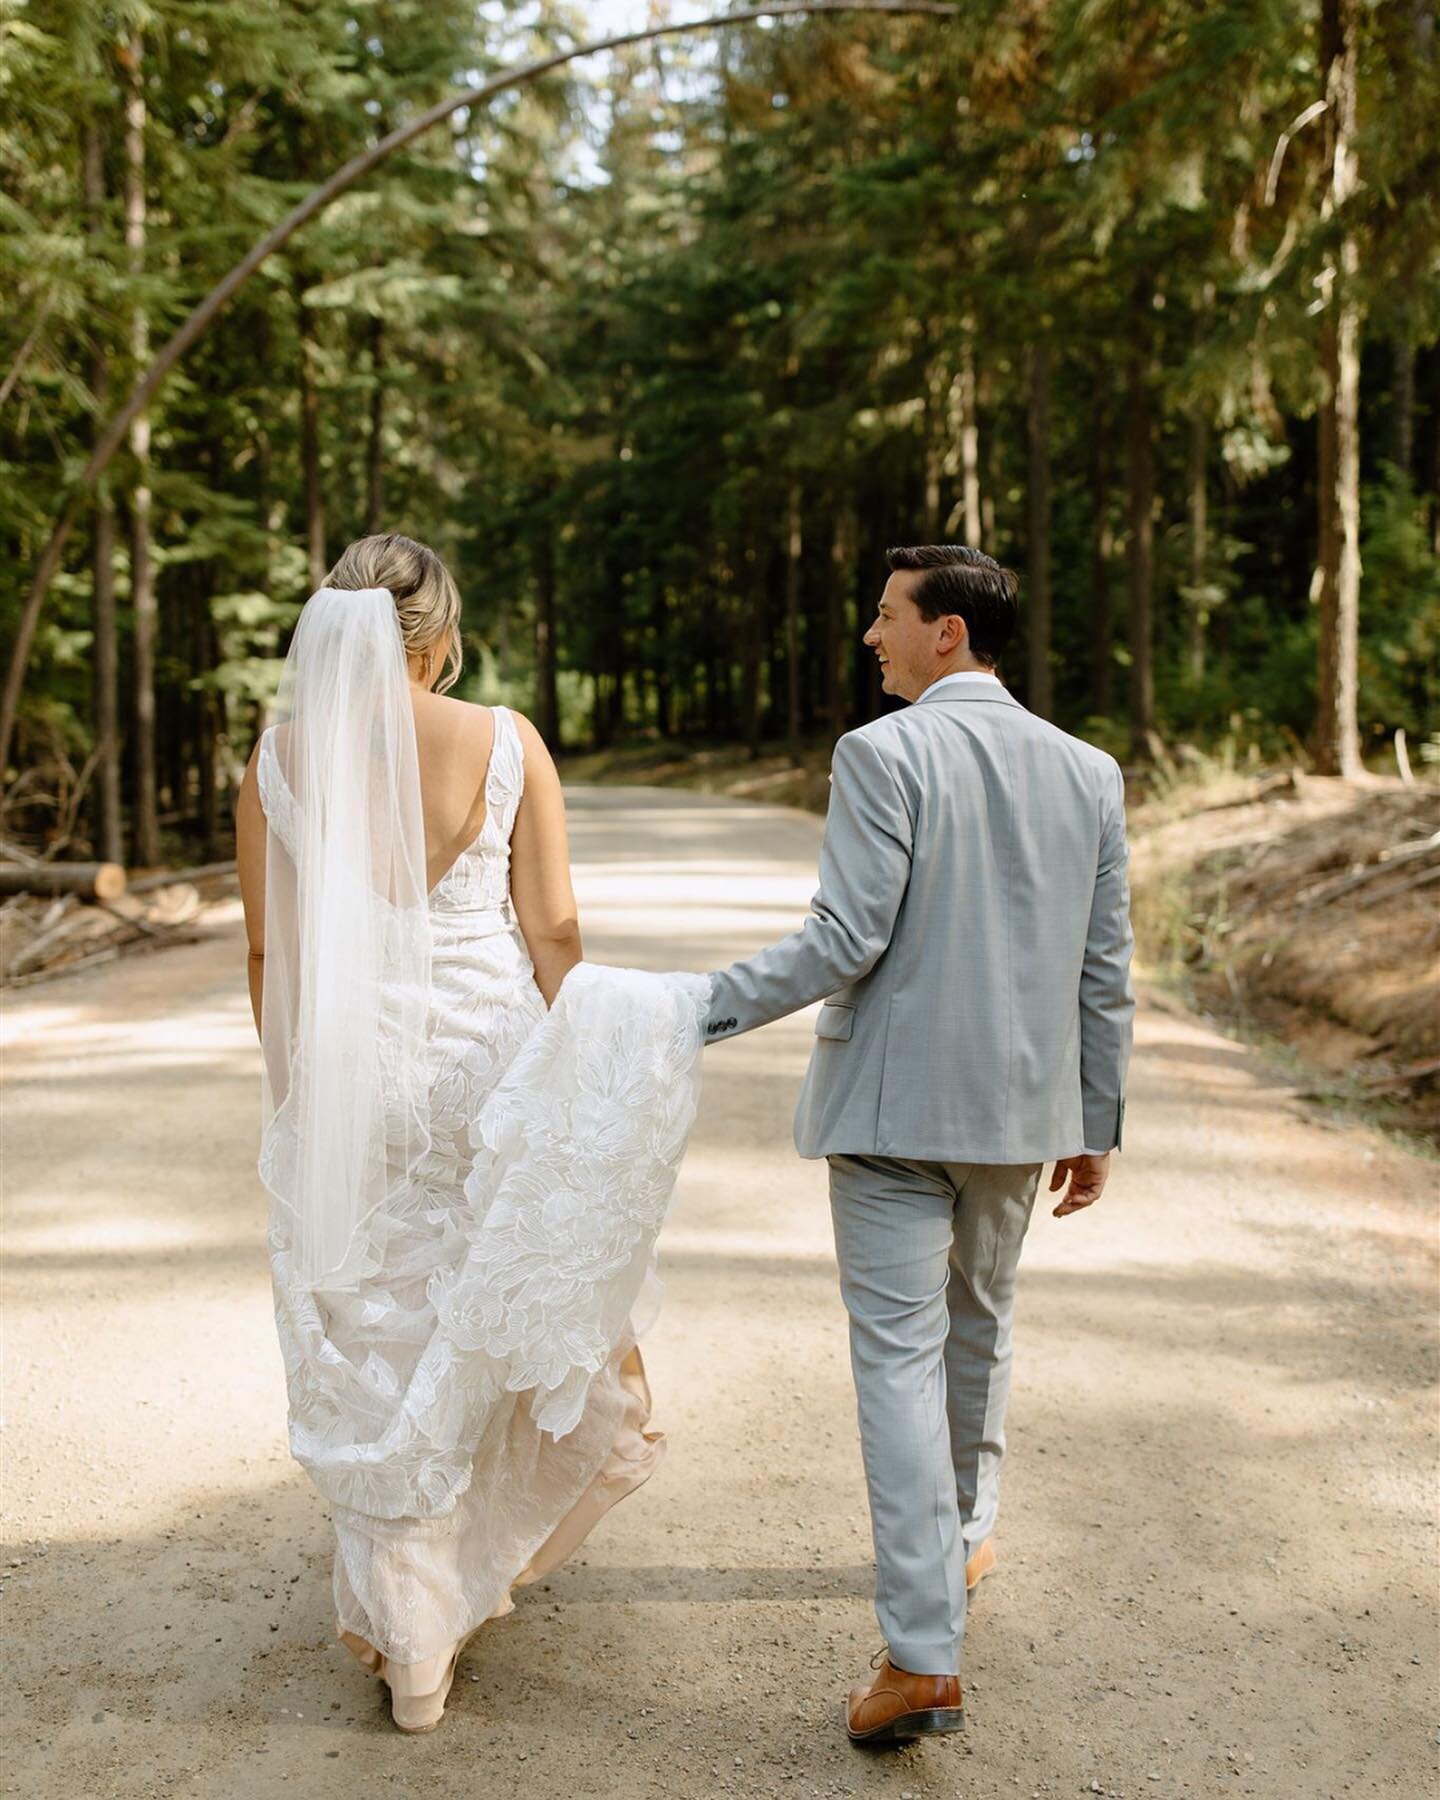 Chayse &amp; Ross&rsquo; @hillsresort wedding is officially on the blog! 

This day was one of the best. Chayse was smiling so hard all day and Ross had the best first look reaction, and everything about this day was just so so good! 

Head on over t